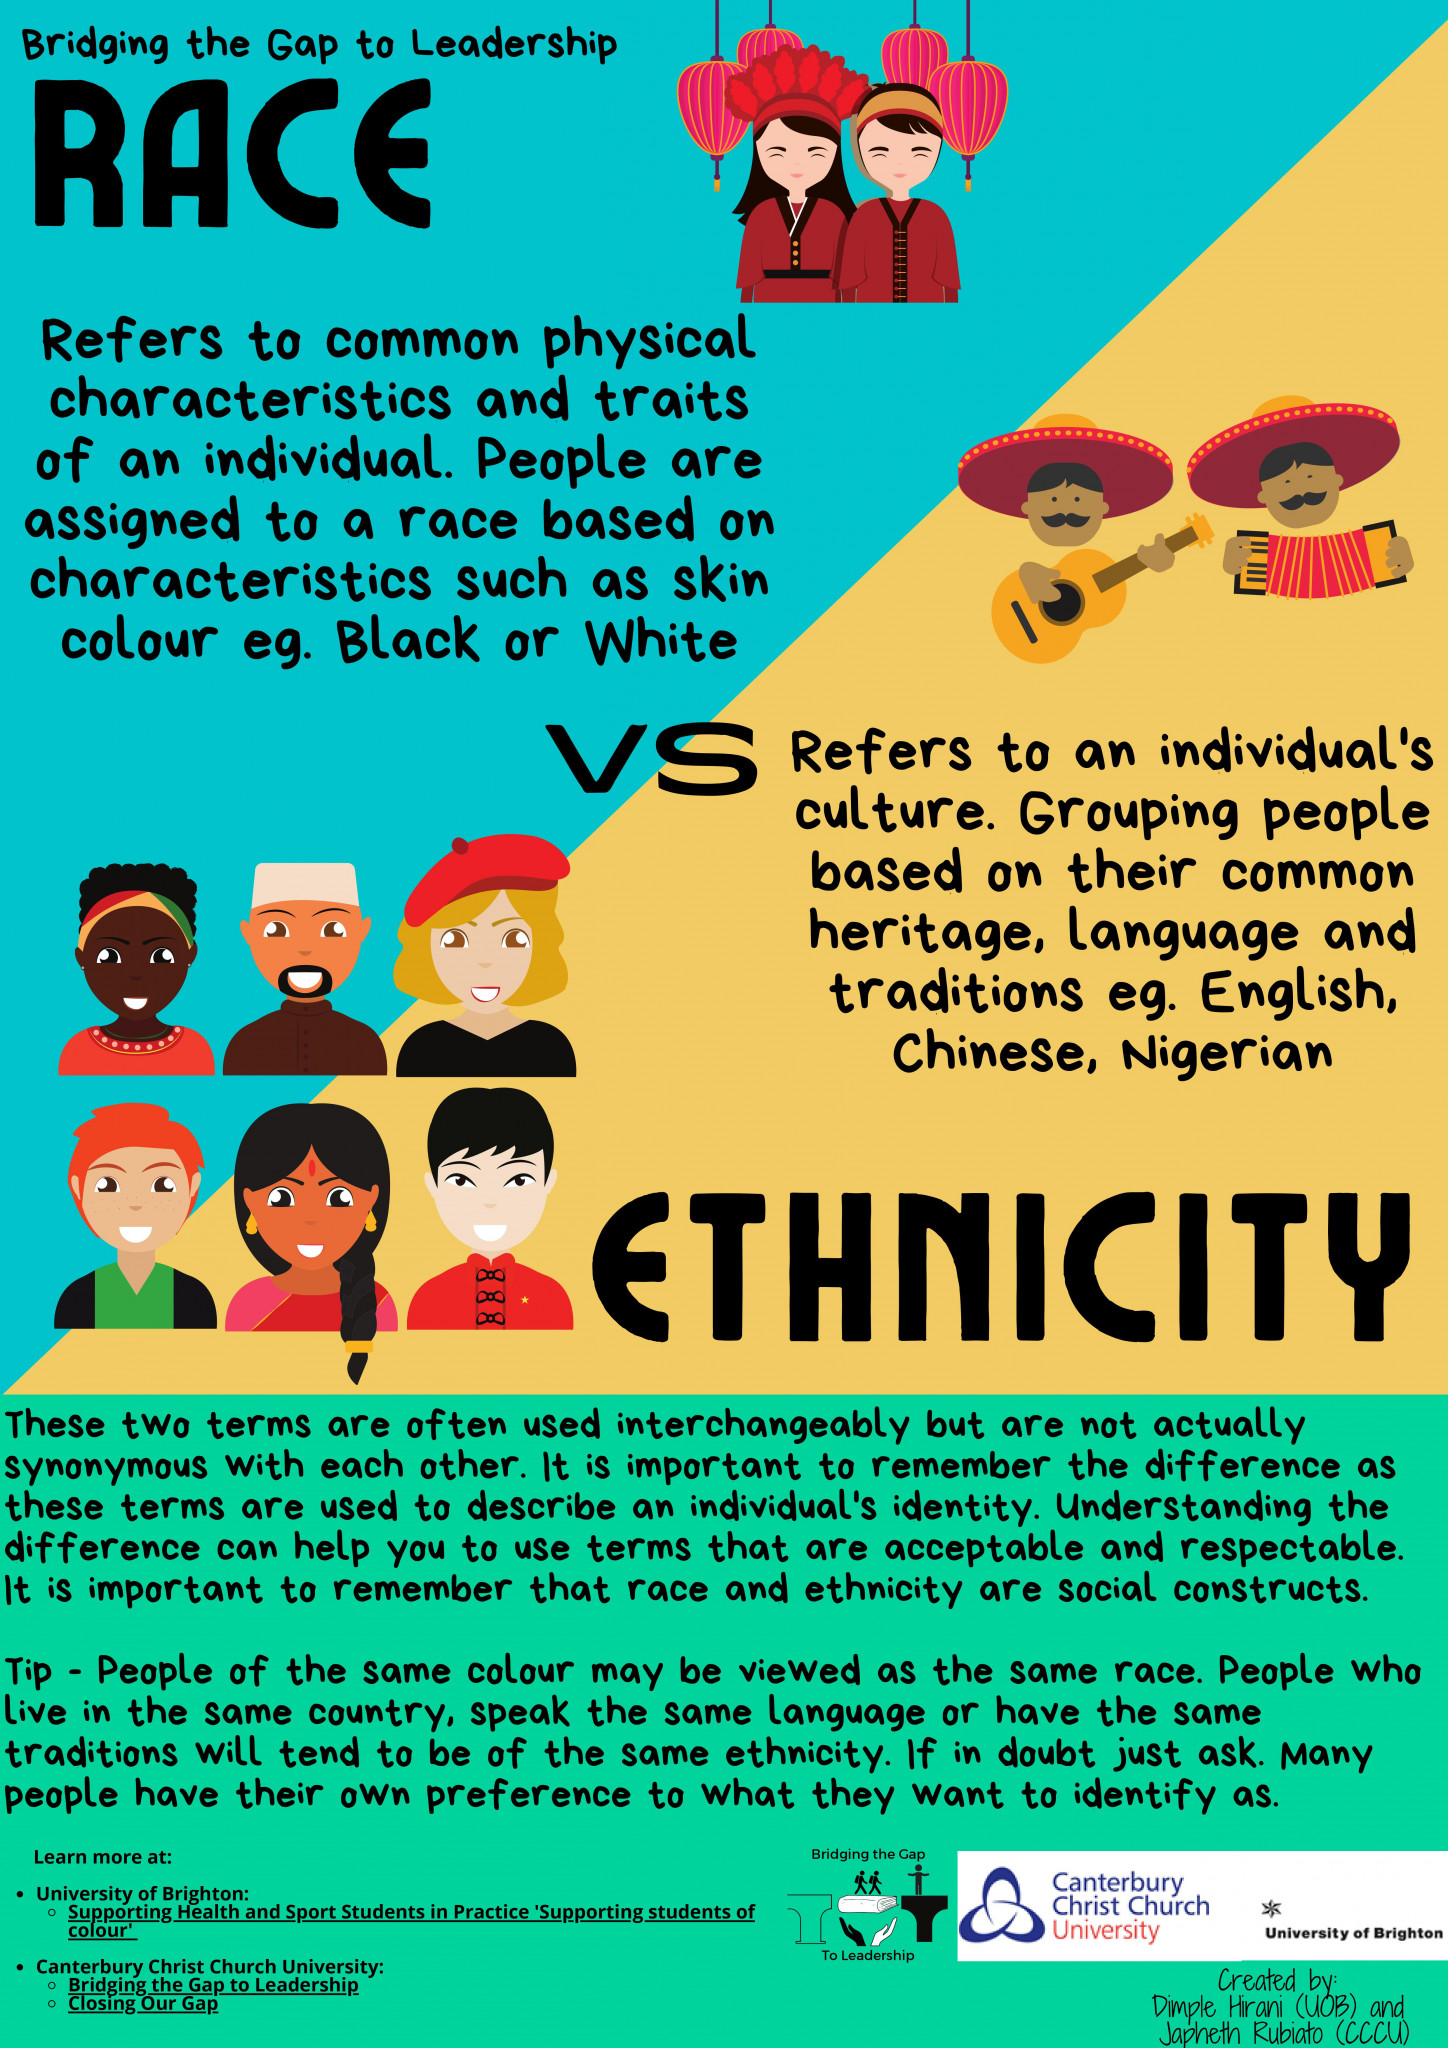 how does race and ethnicity affect education essay